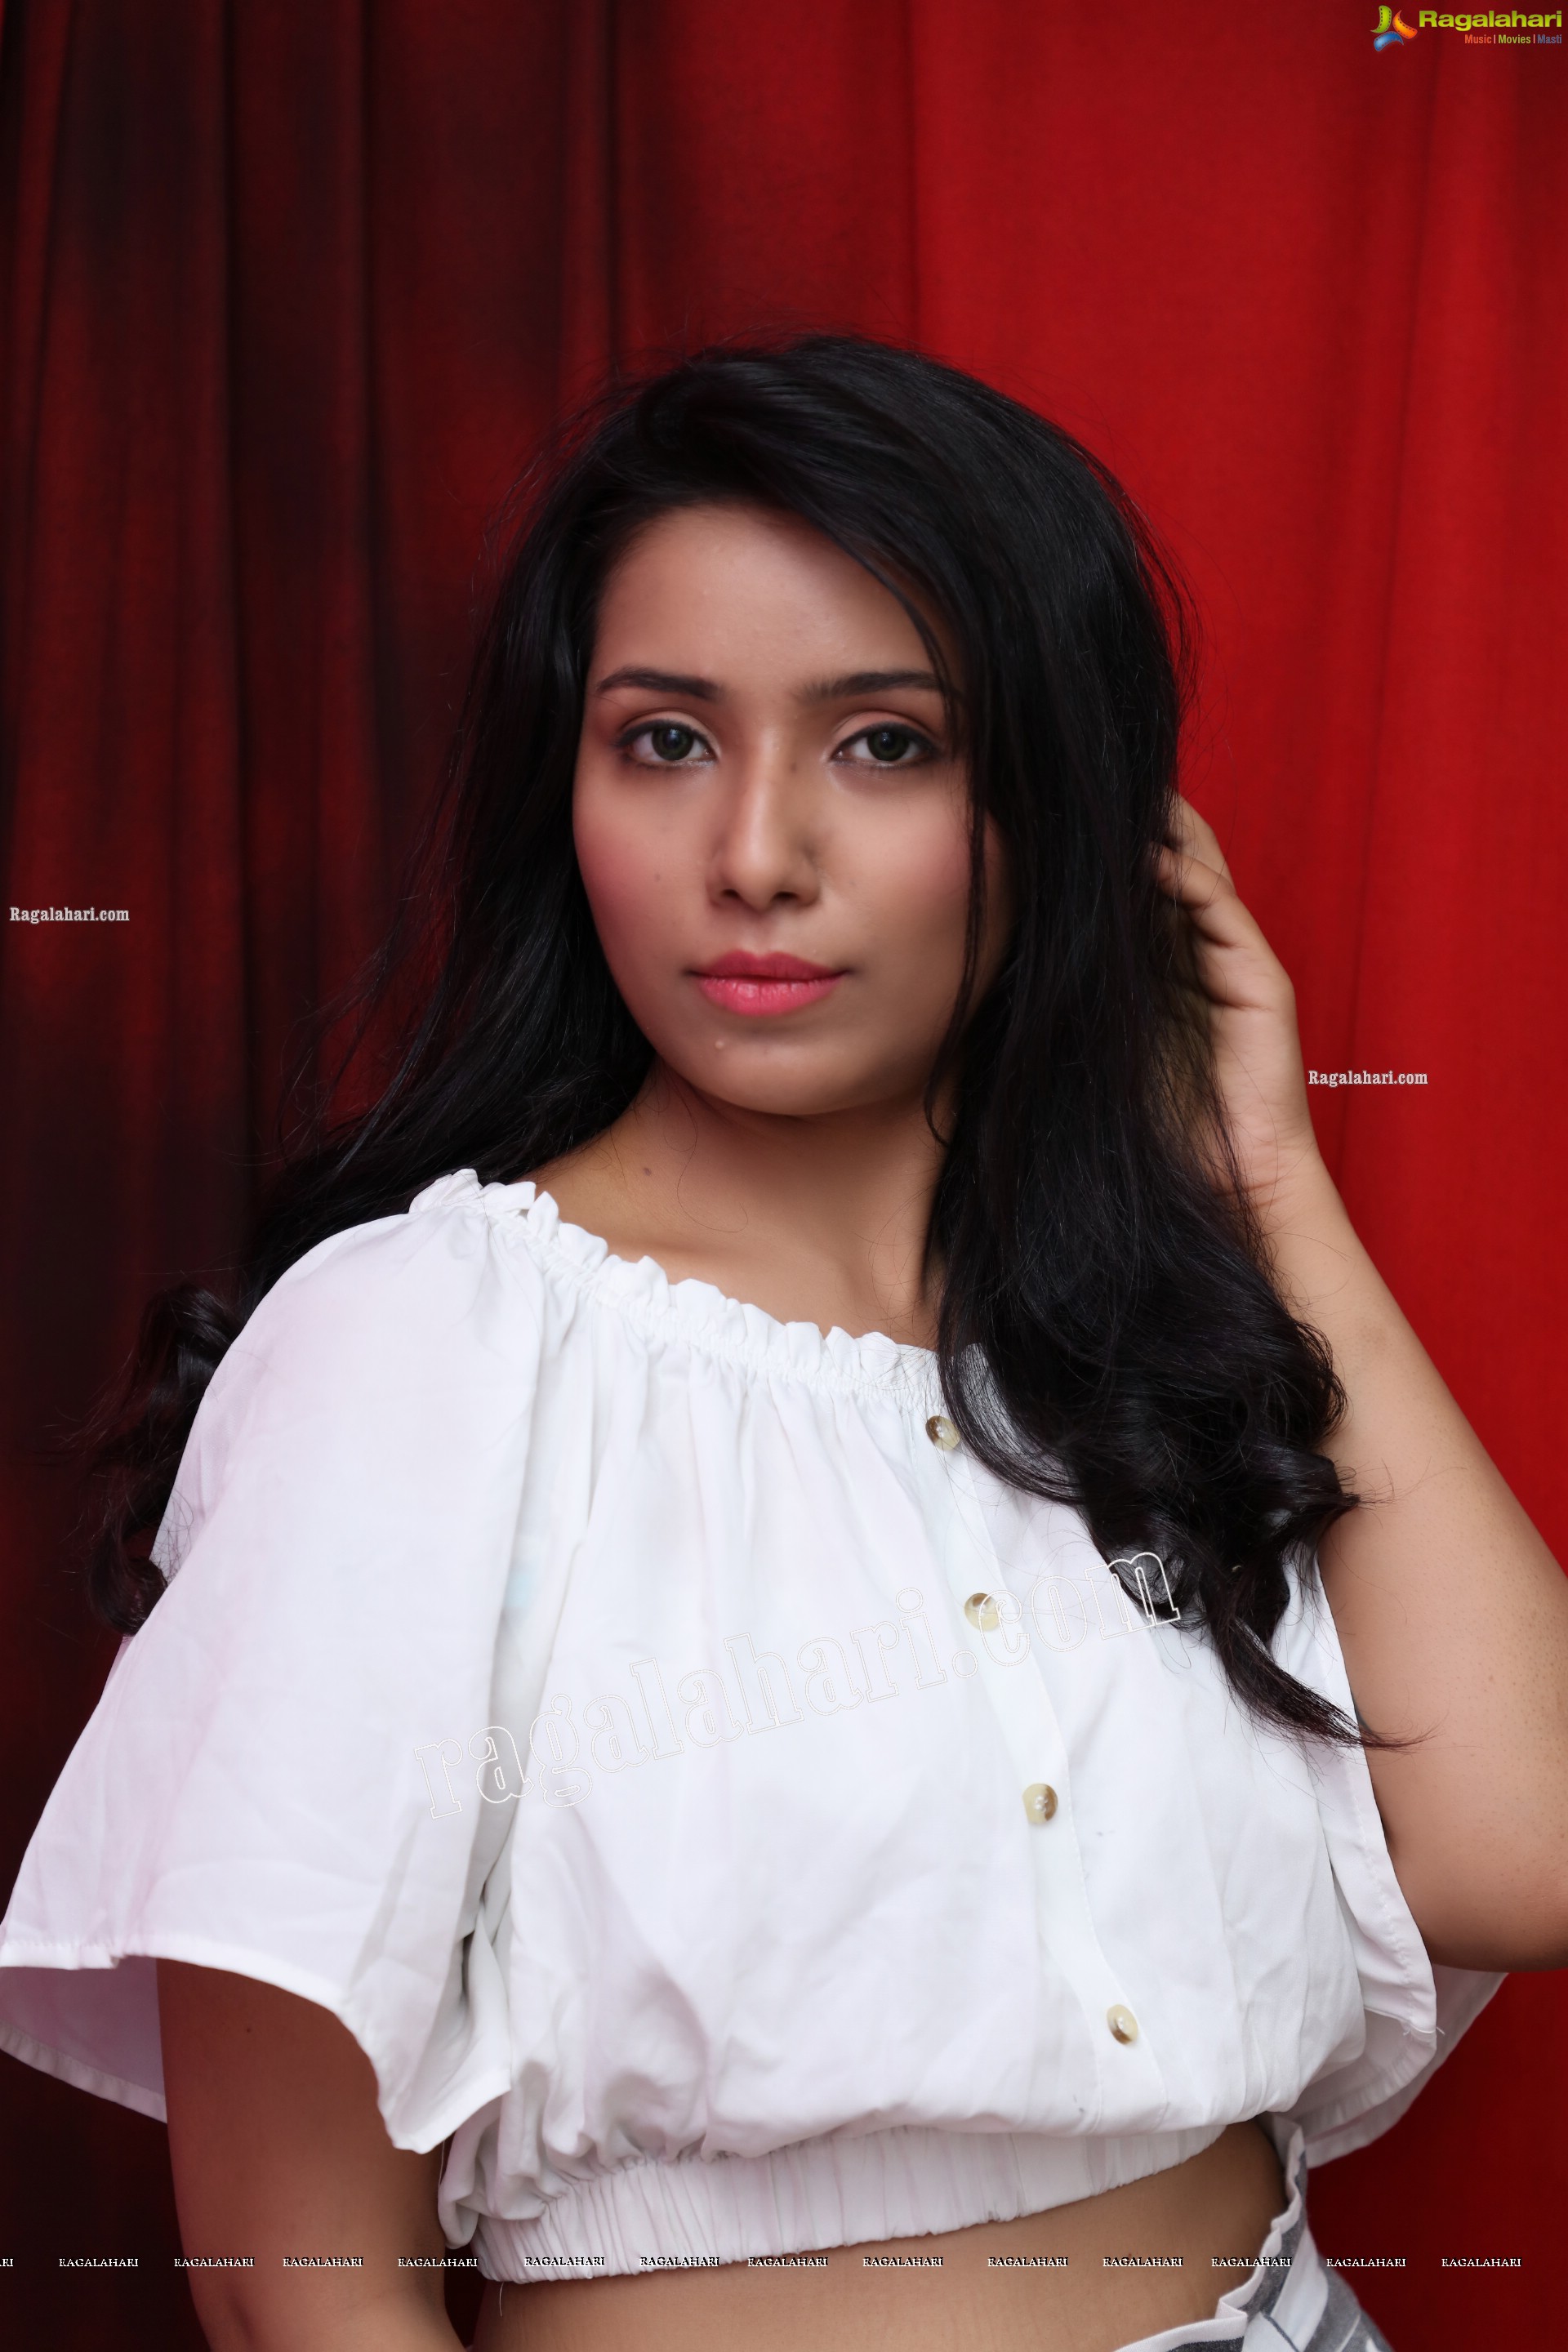 Neha Goswami in White Elastic Waist Crop Top and White Stripes Pant, Exclusive Photo Shoot